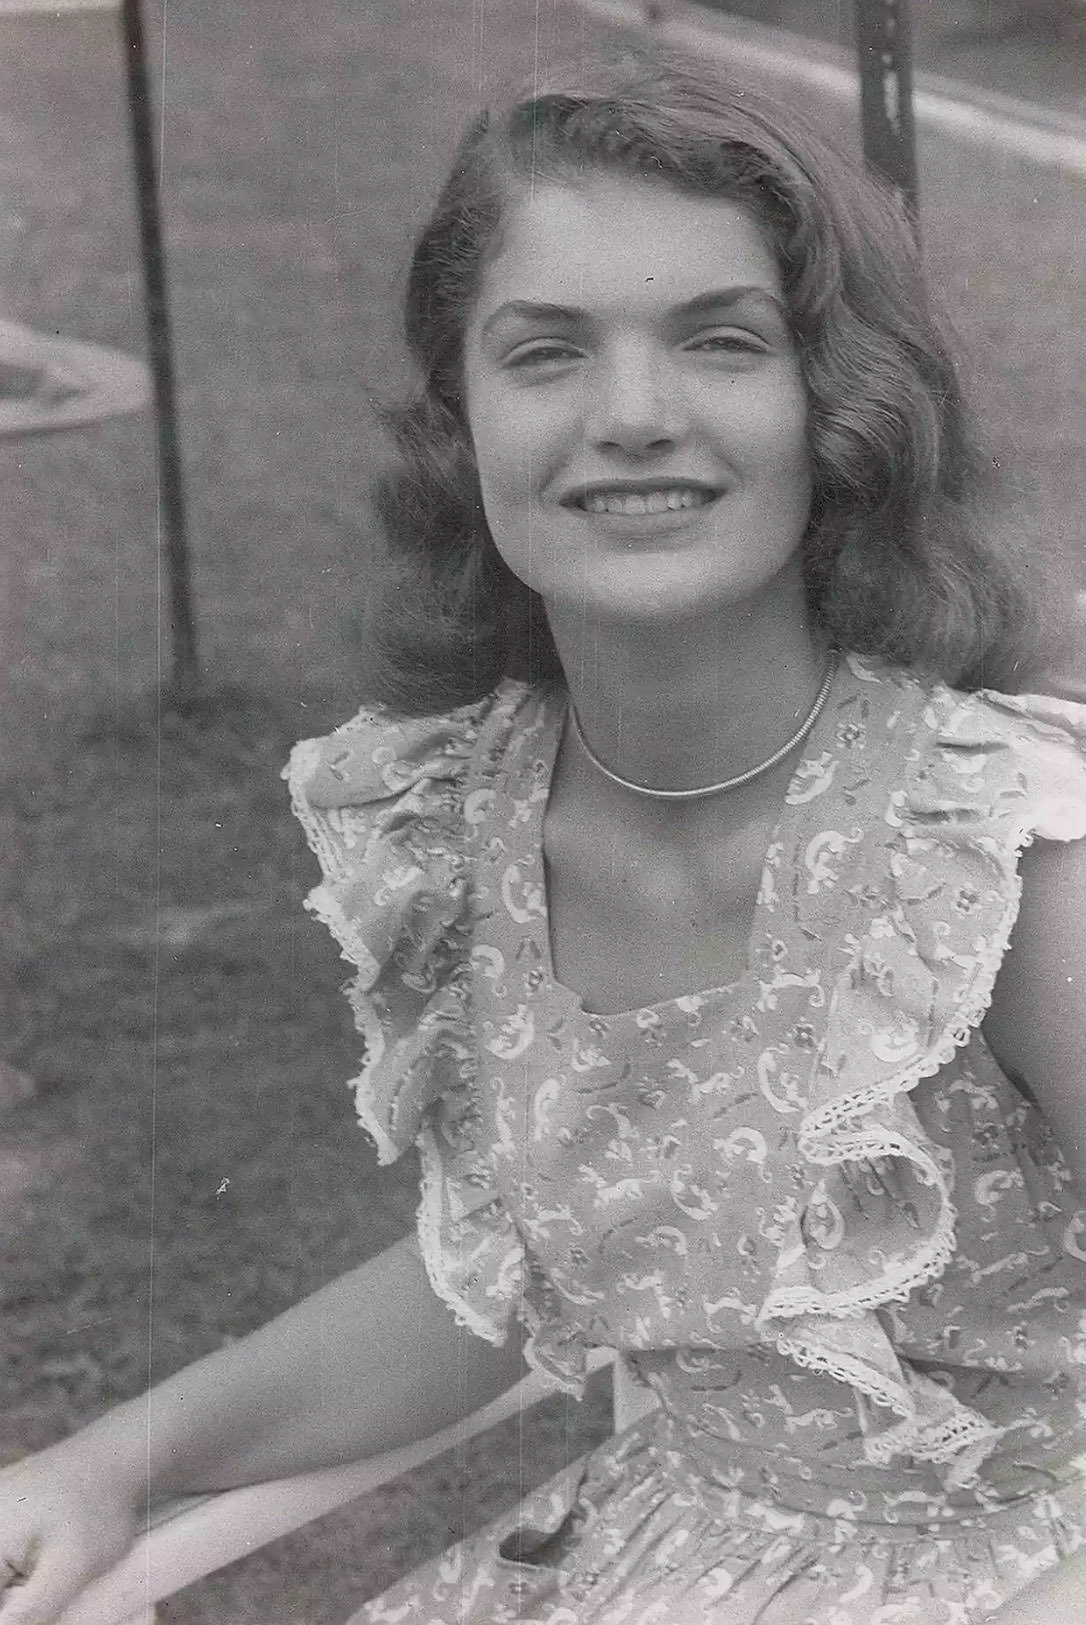 16-Year-Old Jackie Kennedy at The Homestead in the Summer of 1945